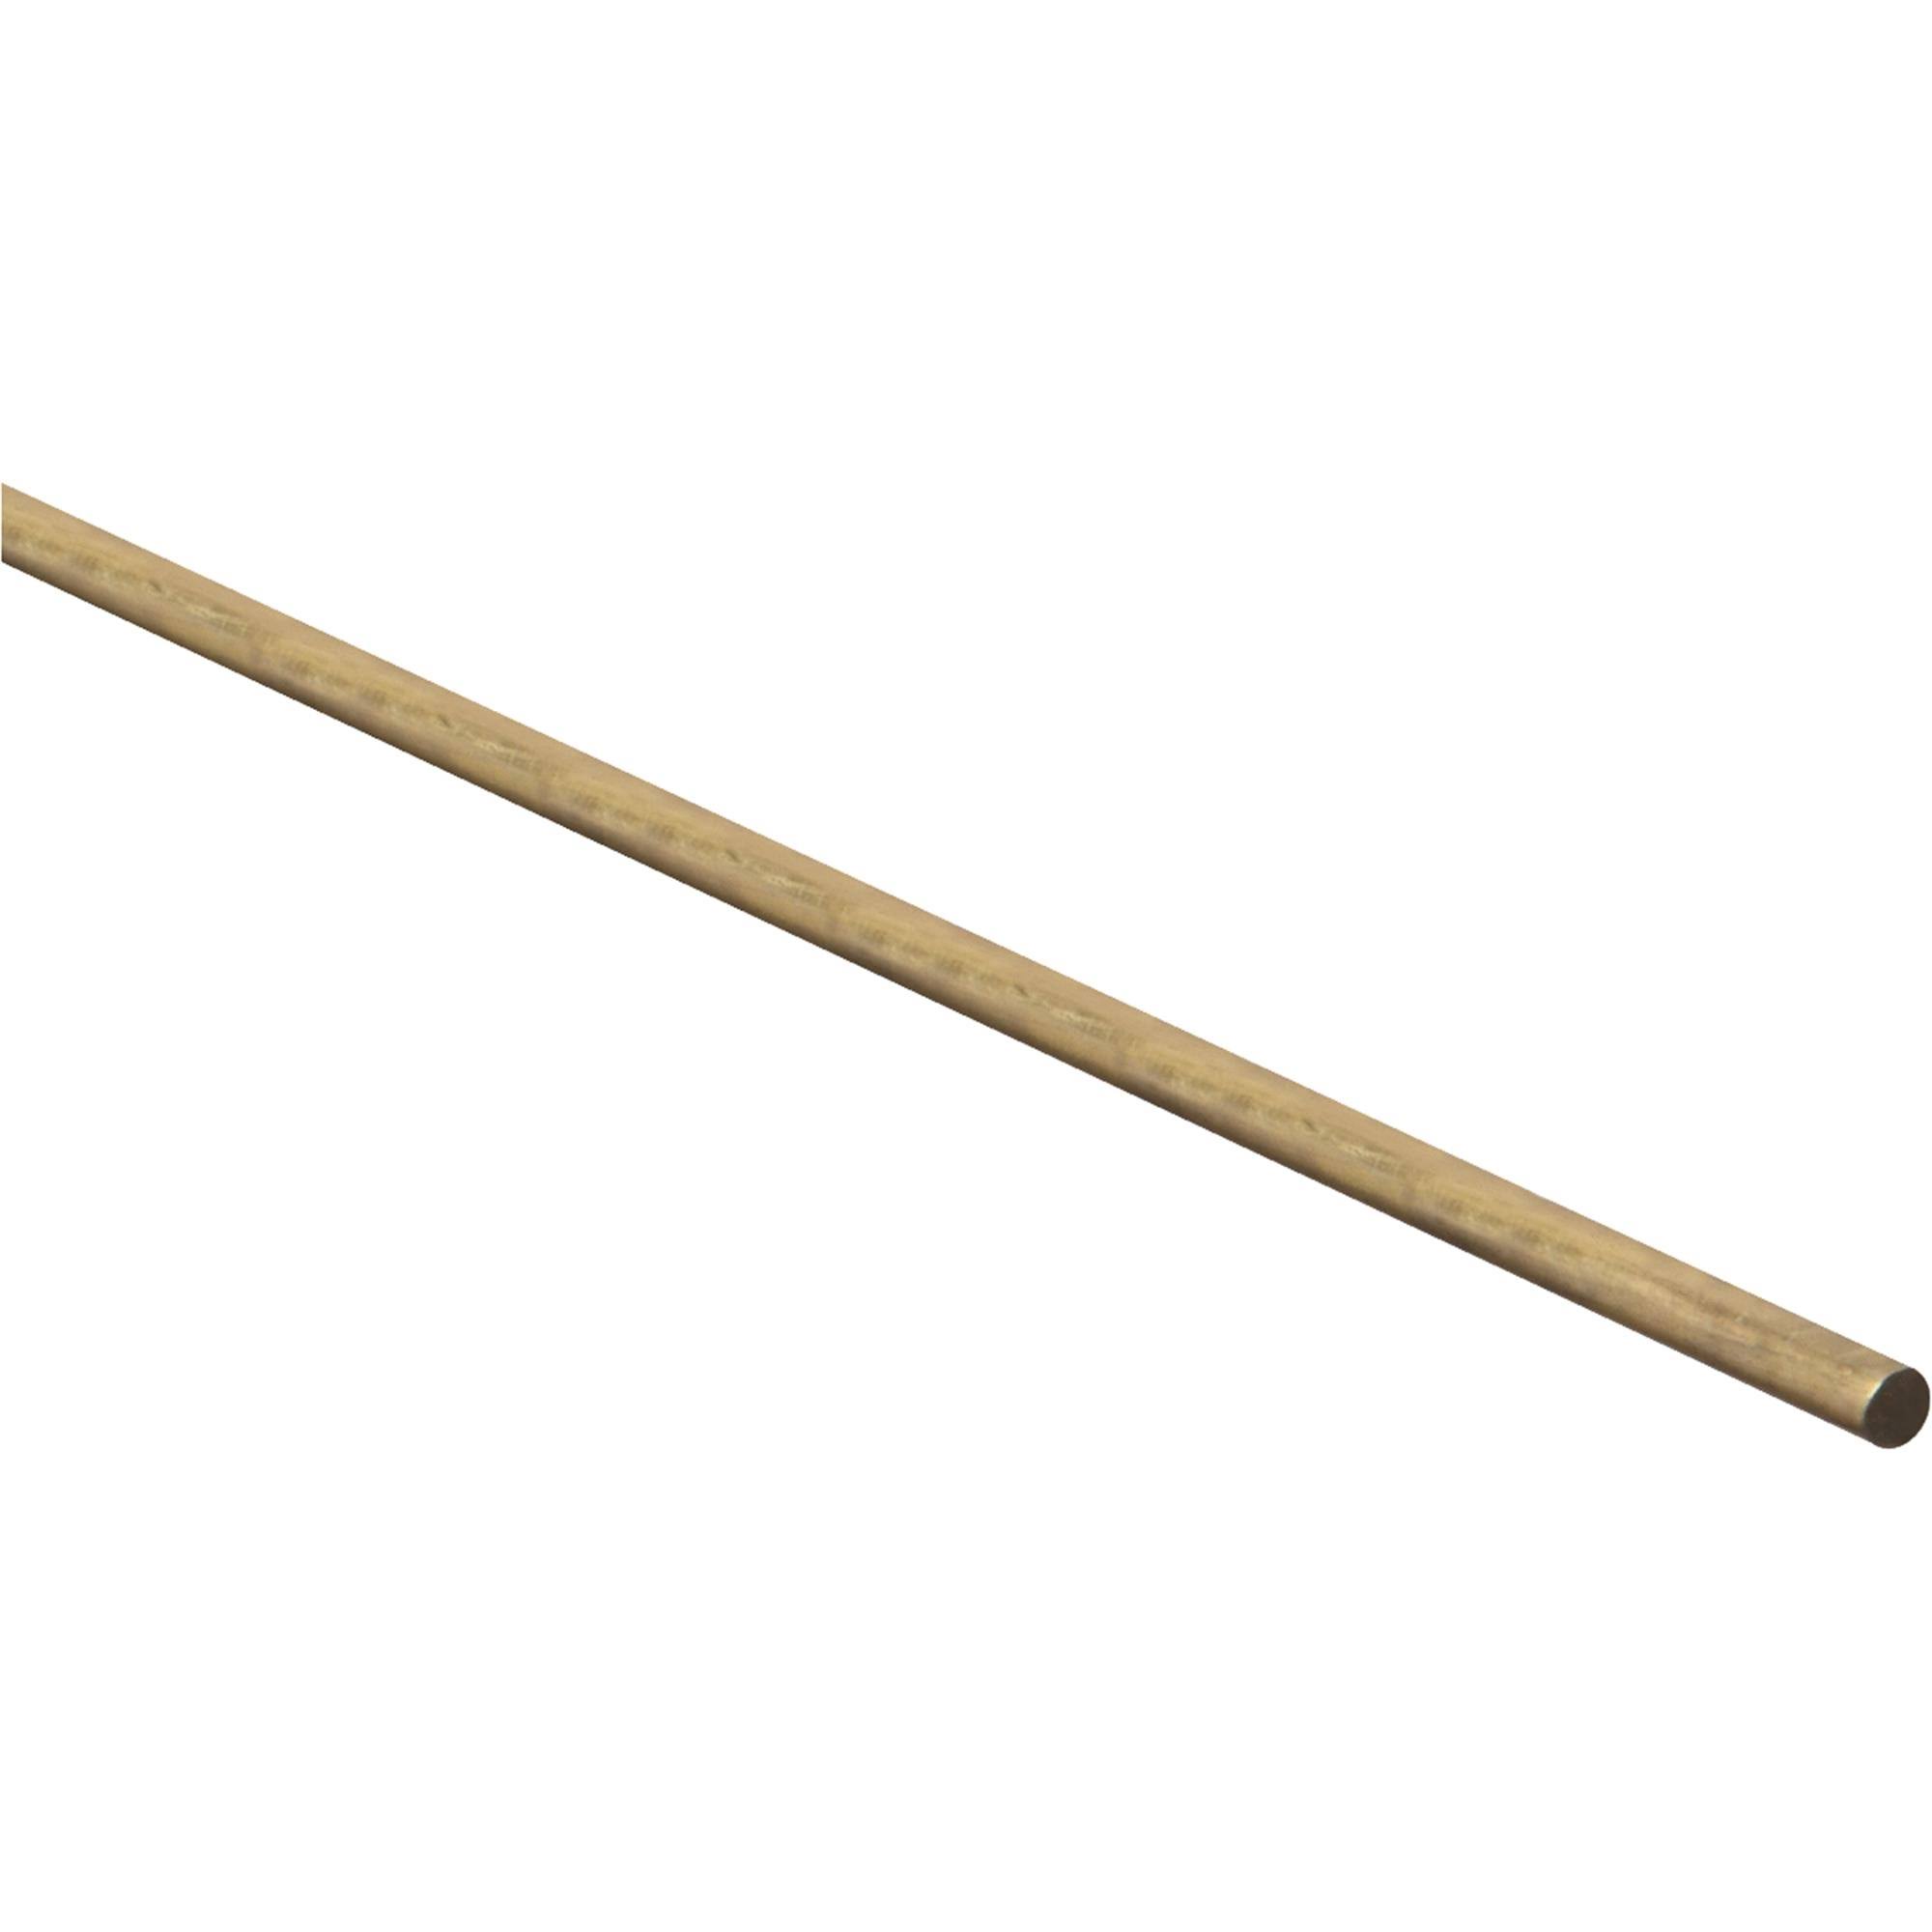 National N215-244 Mfg. Smooth Solid Rod - Brass, 1/4" Dia x 36"